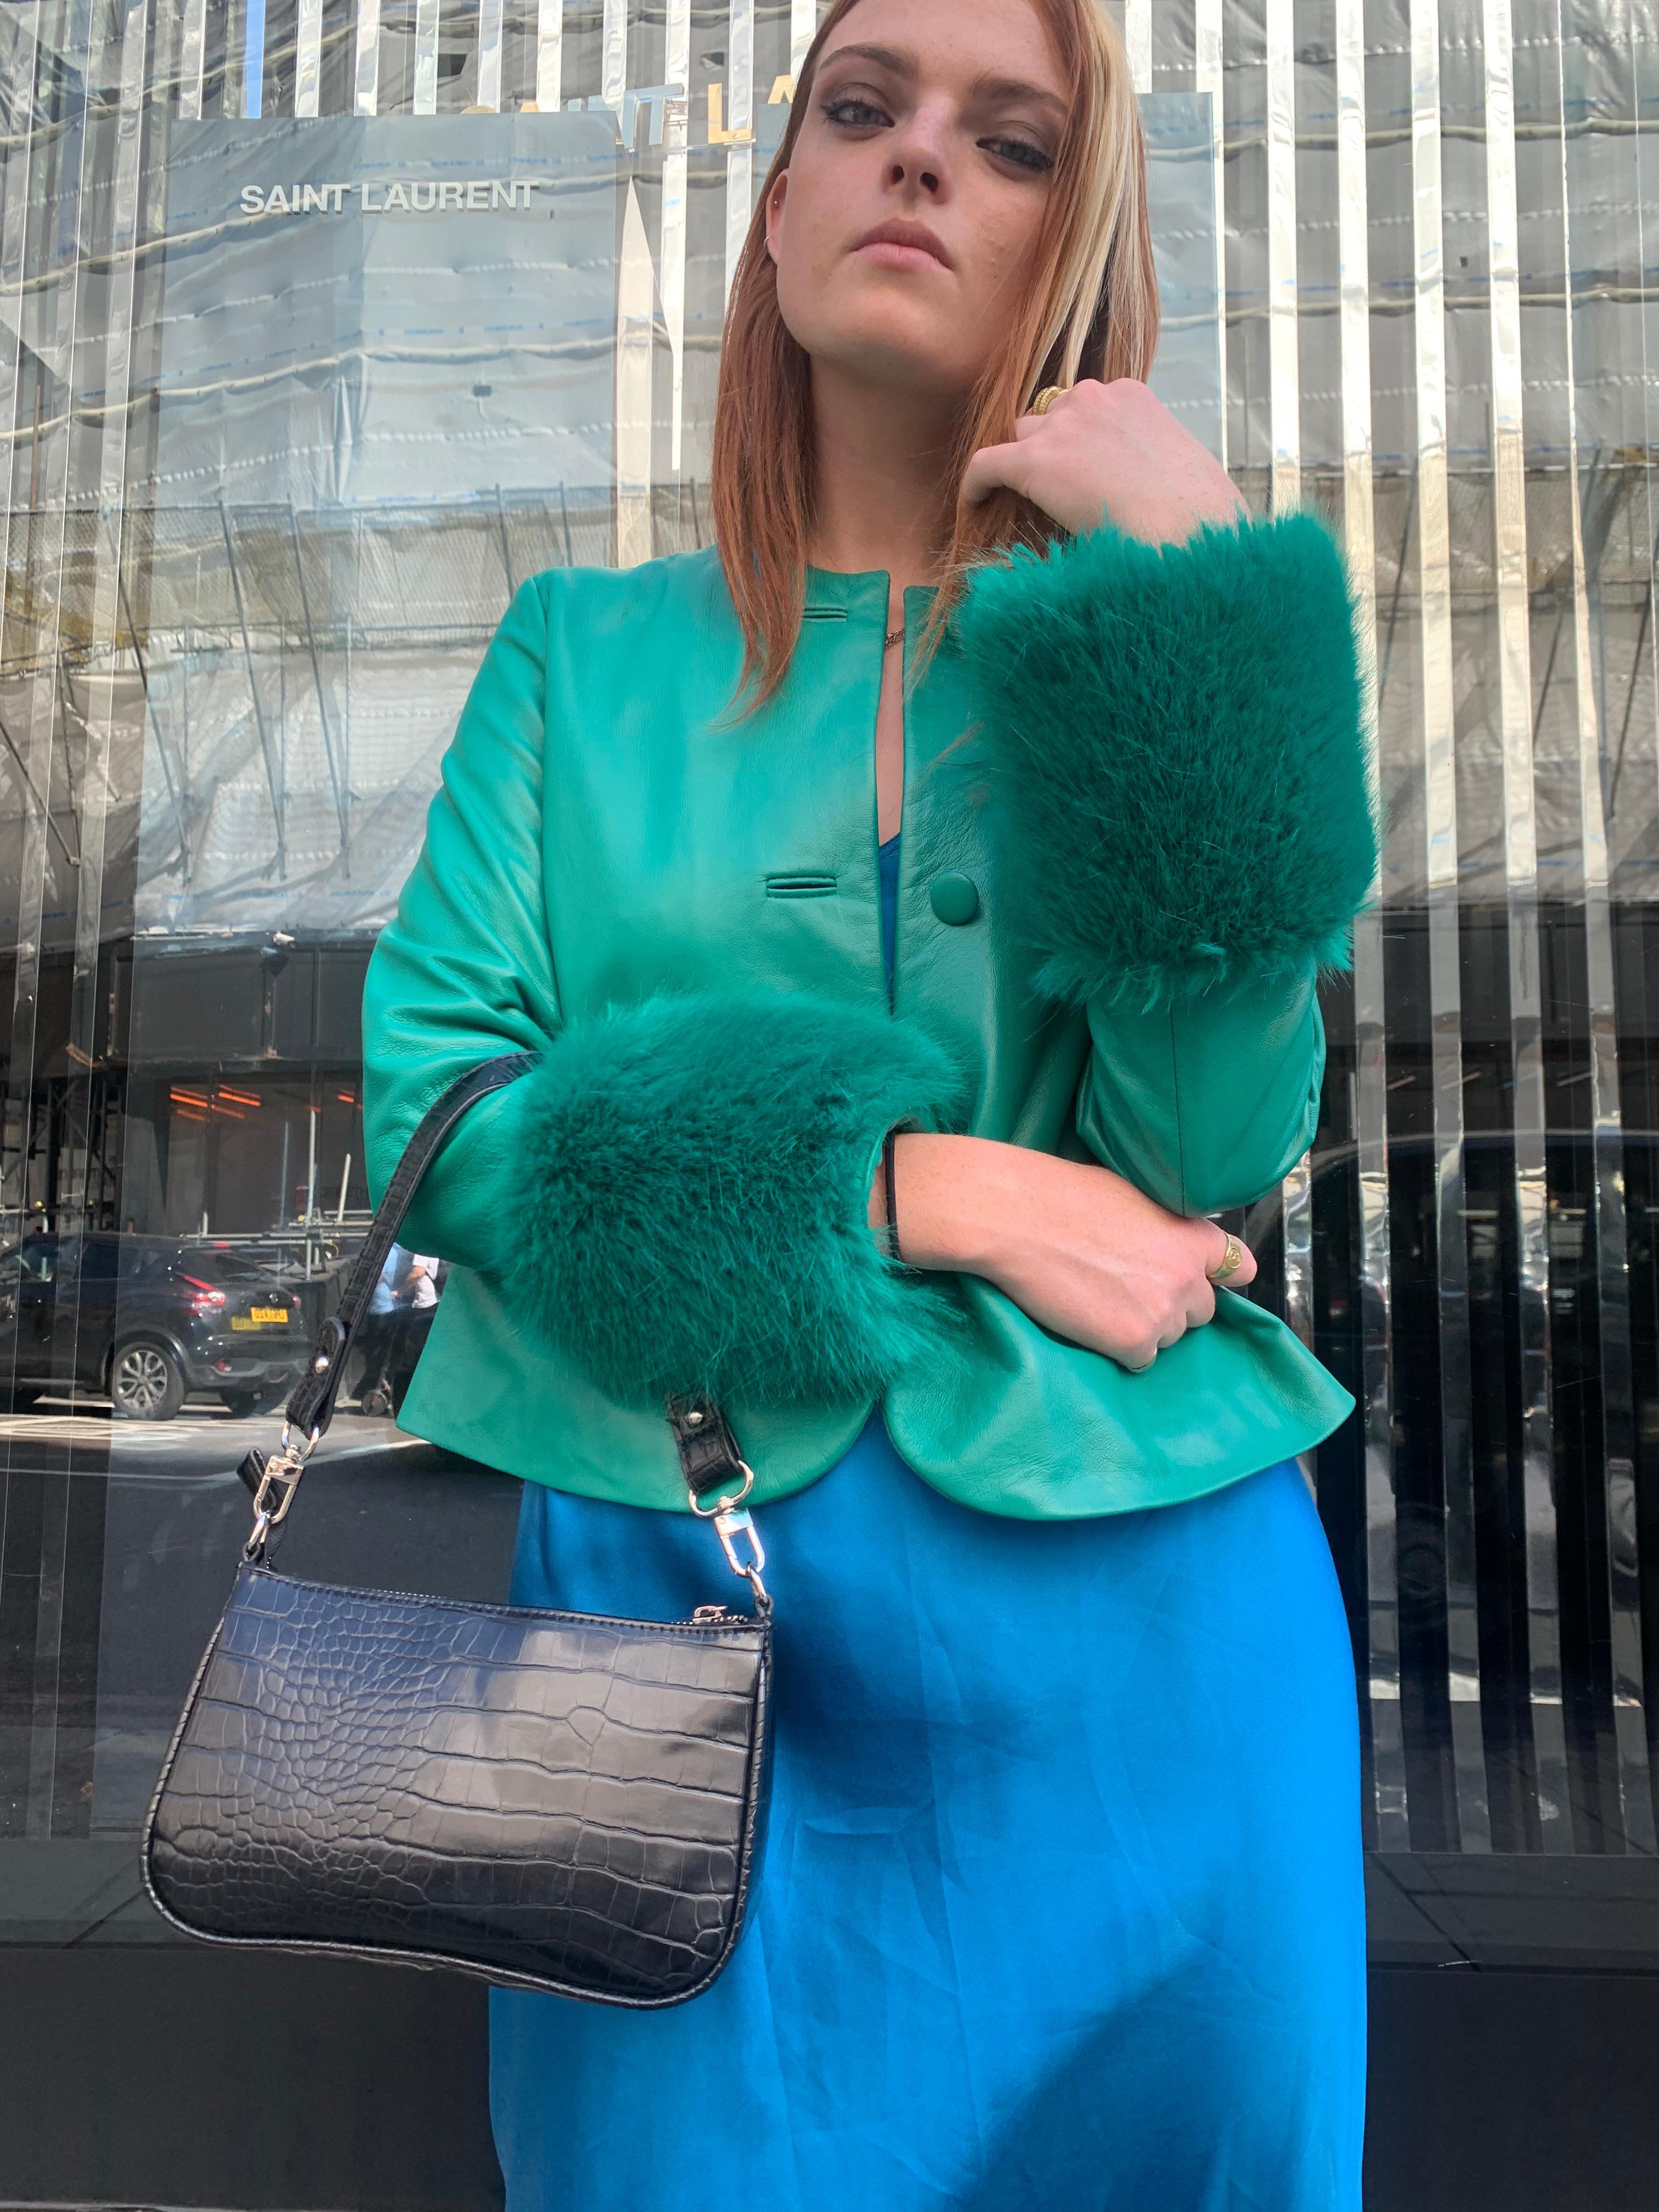 Verheyen Vita Cropped Jacket in Emerald Green leather & Faux Fur - Size uk 8

Handmade in London, made with 100% Italian Lambs Leather and the highest quality of faux fur to match, this luxury item is an investment piece to wear for a lifetime. 